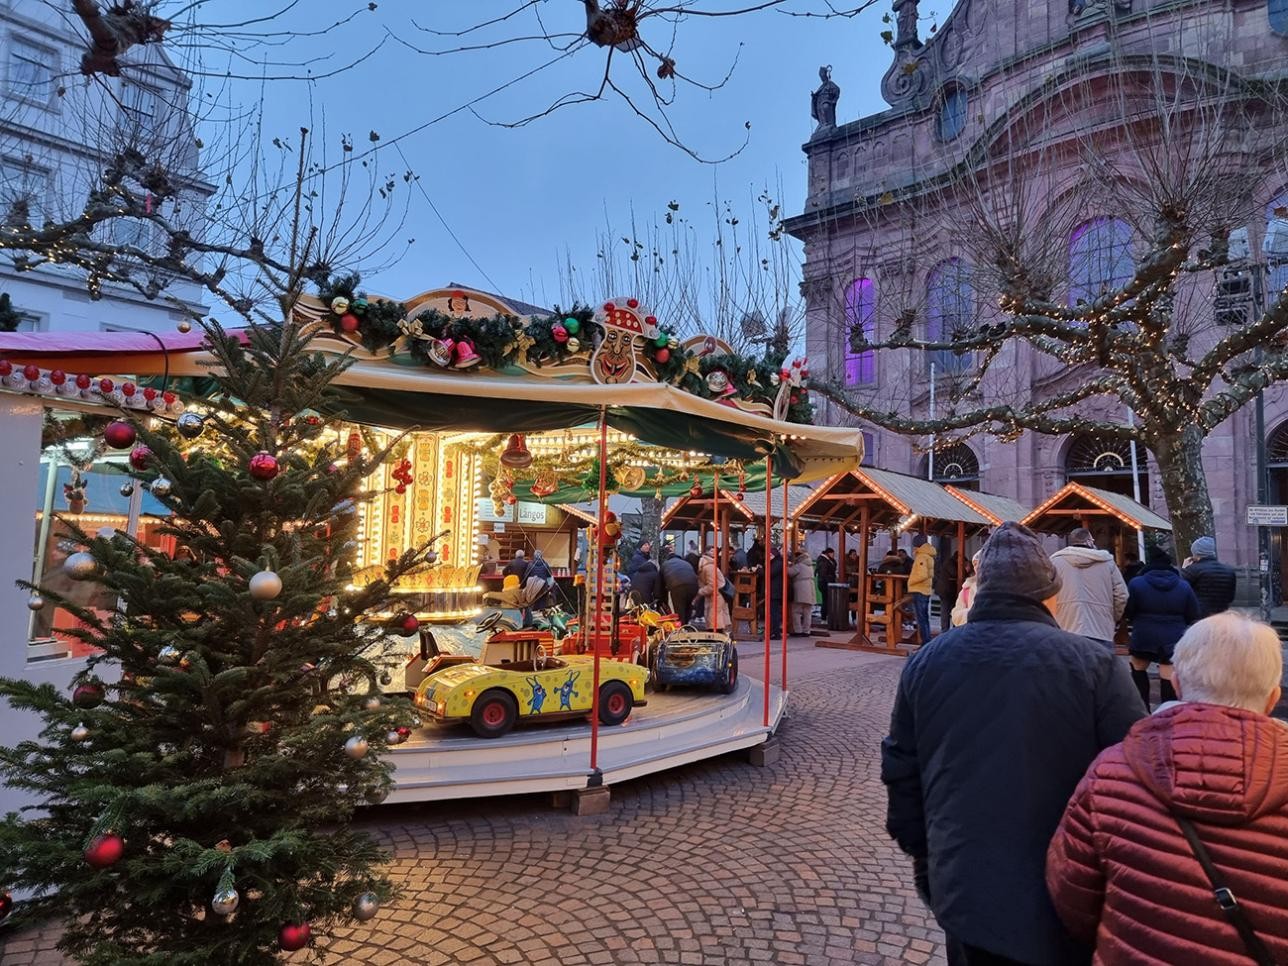 Carousel at the Christmas market